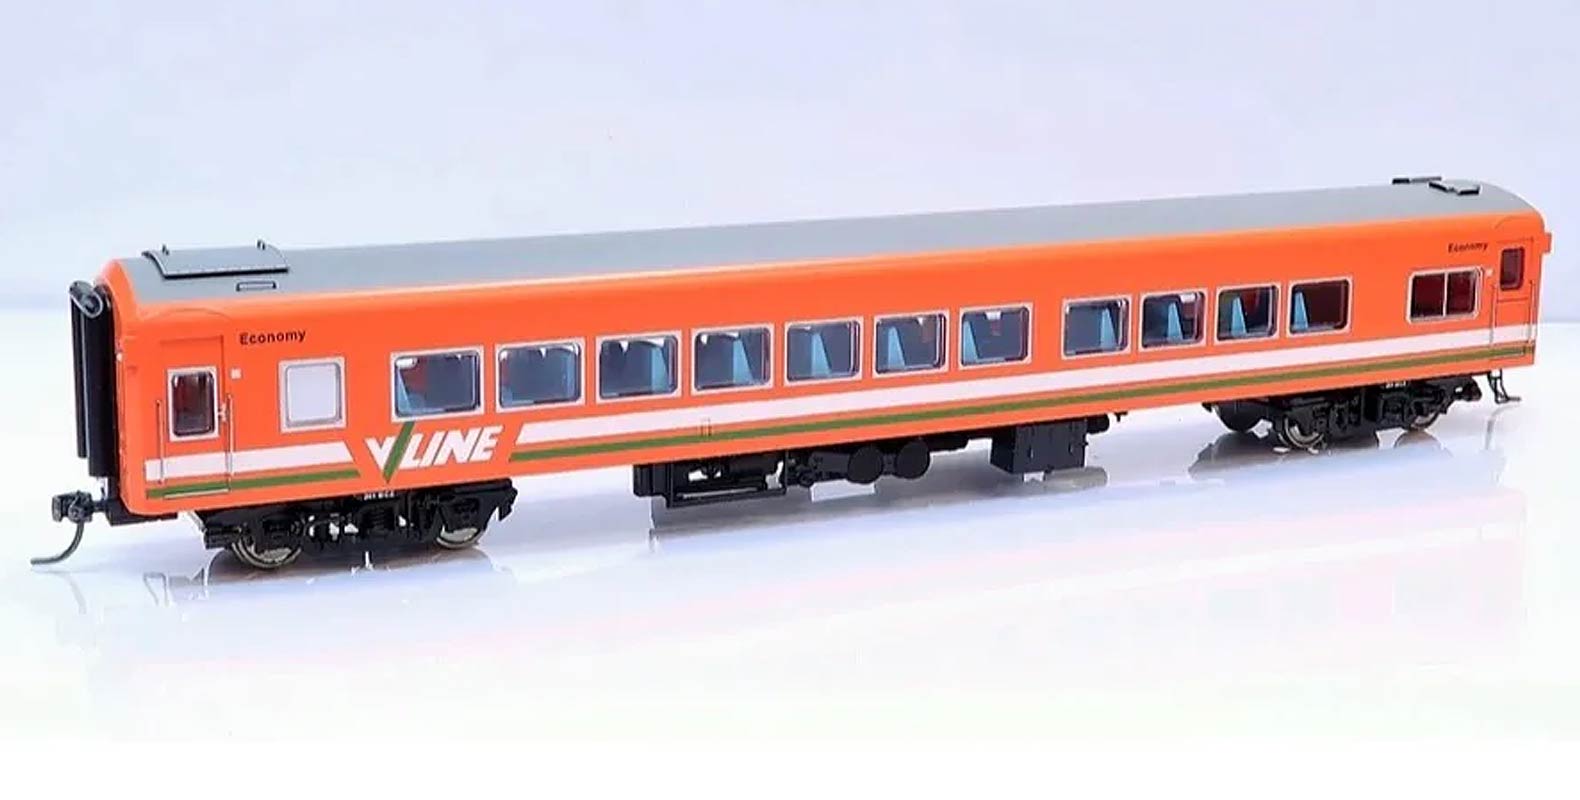 Latest Rolling Stock